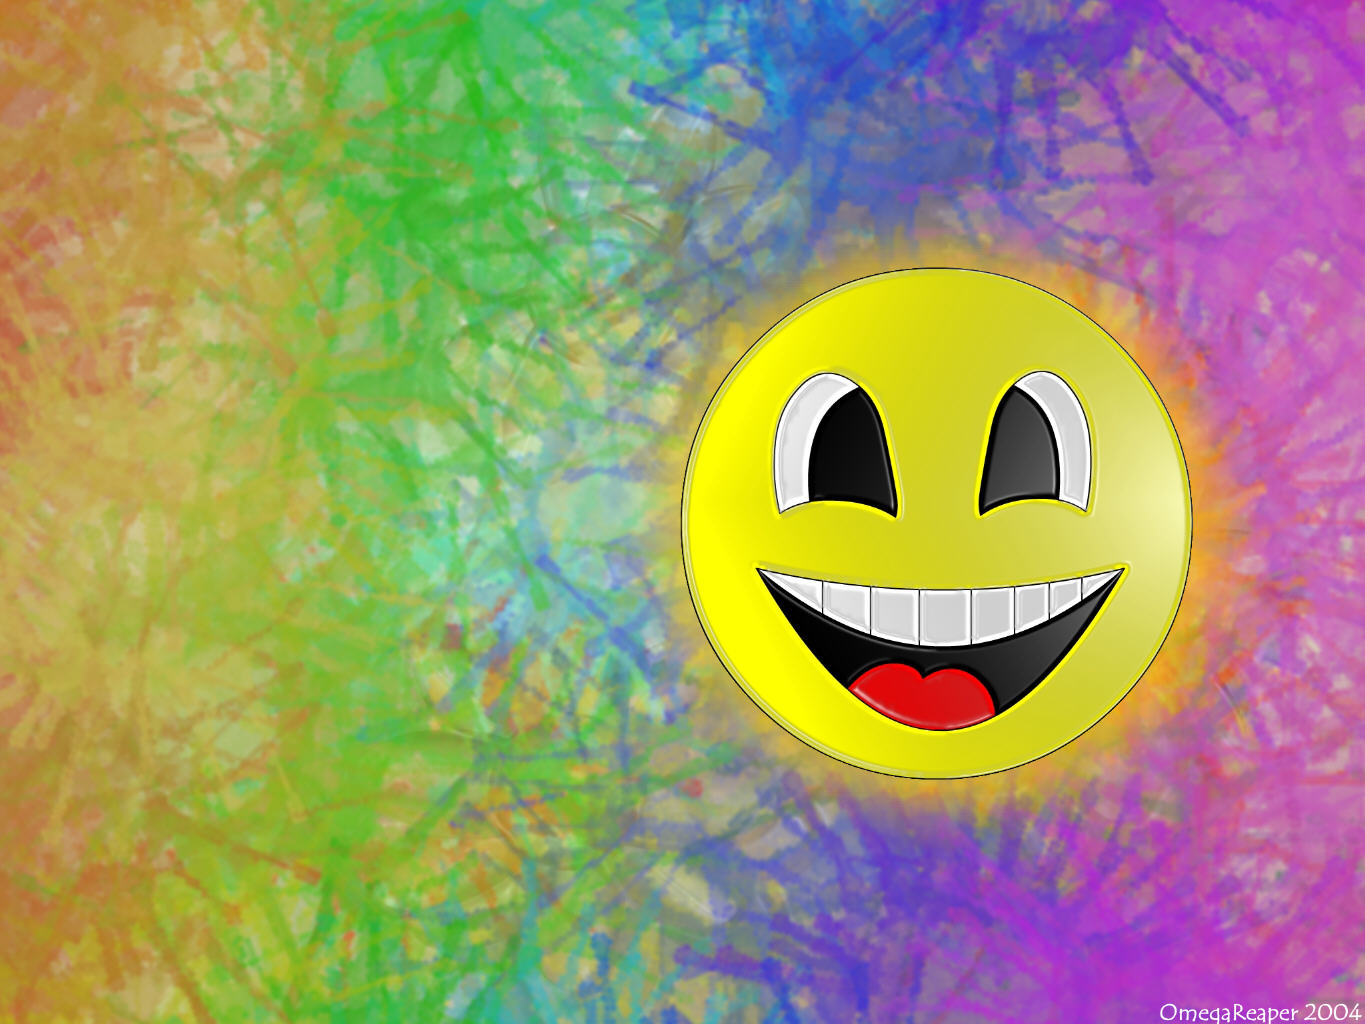 Best Colorful Happy Smiley Wallpaper Android Wallpaper with 1365x1024 1365x1024